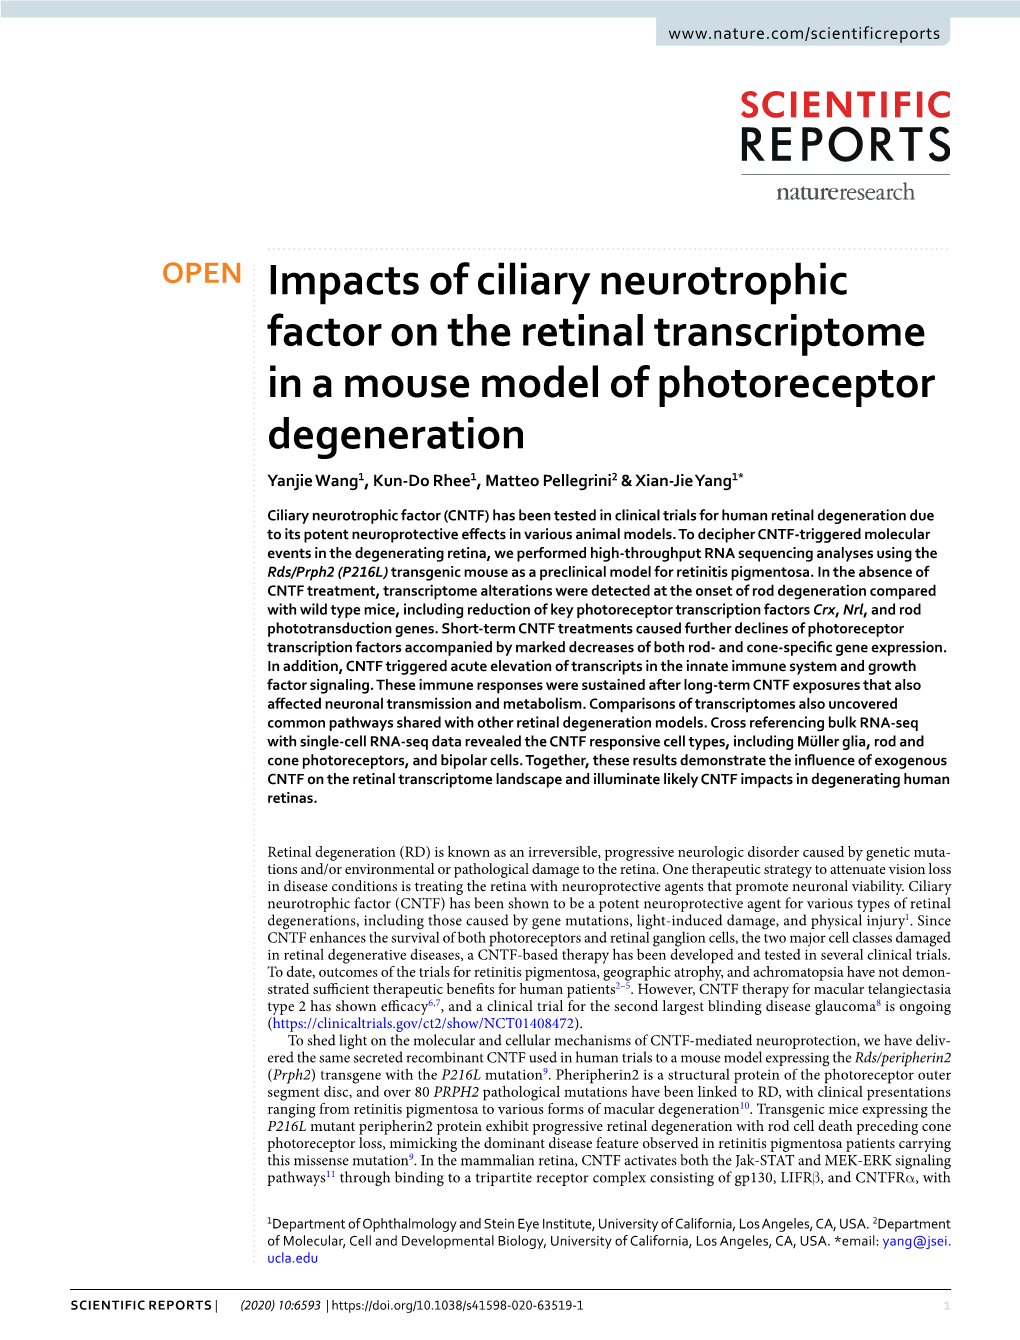 Impacts of Ciliary Neurotrophic Factor on the Retinal Transcriptome in a Mouse Model of Photoreceptor Degeneration